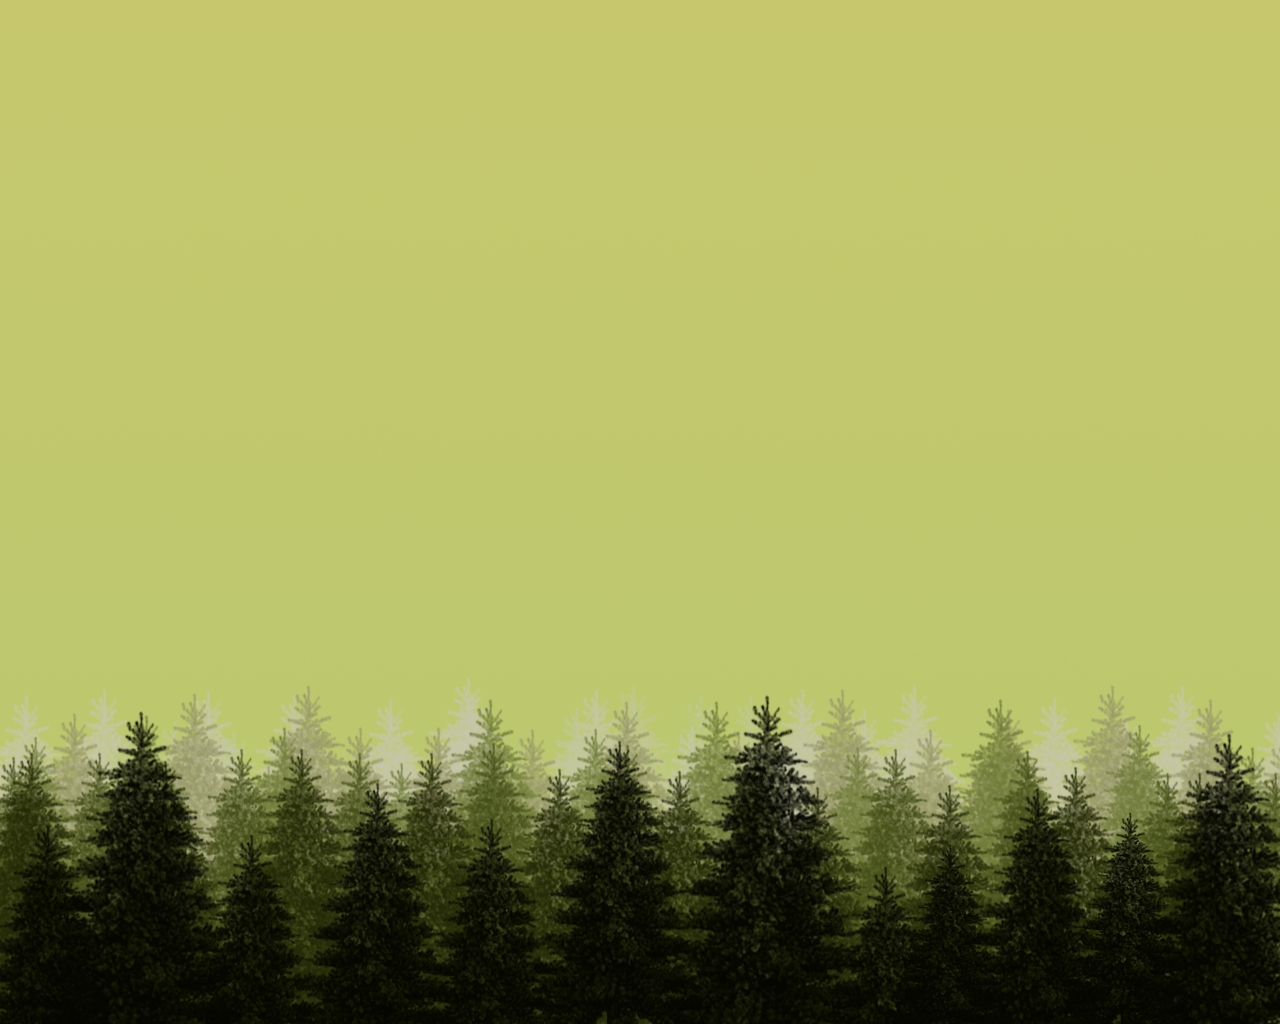 Pine forest by softwalls on